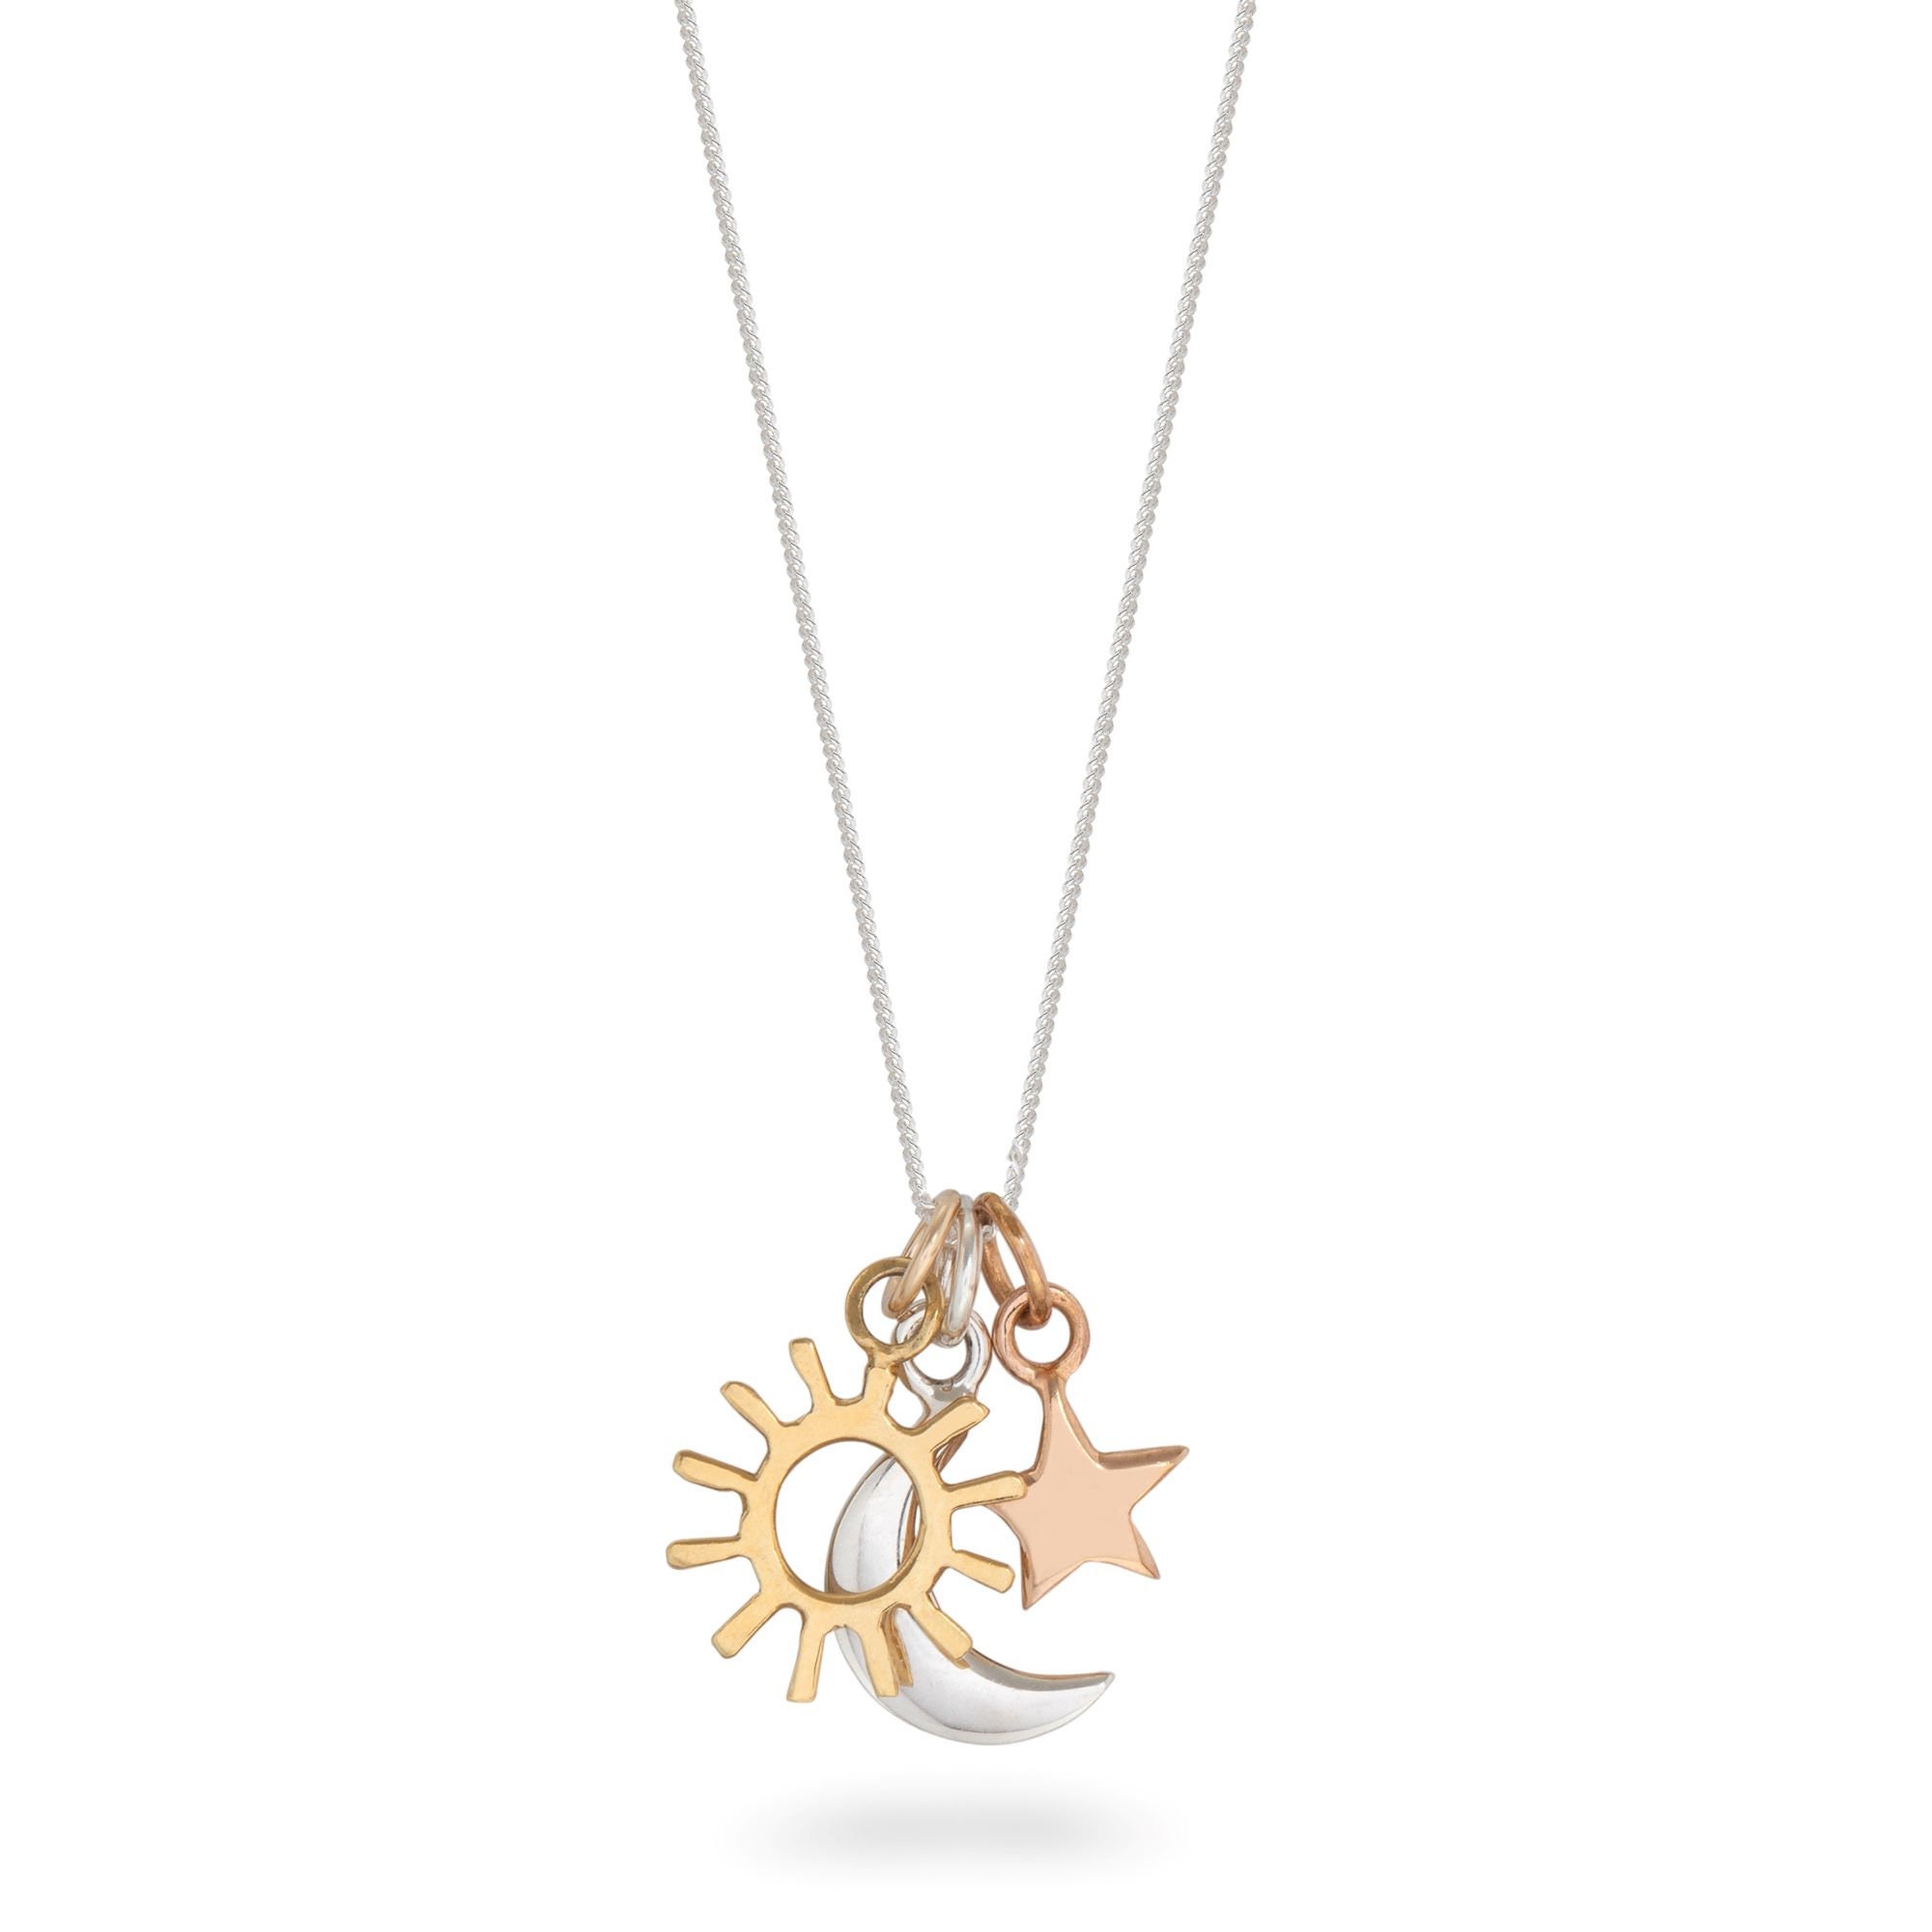 Light Luxury Gold Plated Eight-Pointed Star Pendant Necklace Snake Chain  Jewelry - China Necklace and Jewelry price | Made-in-China.com